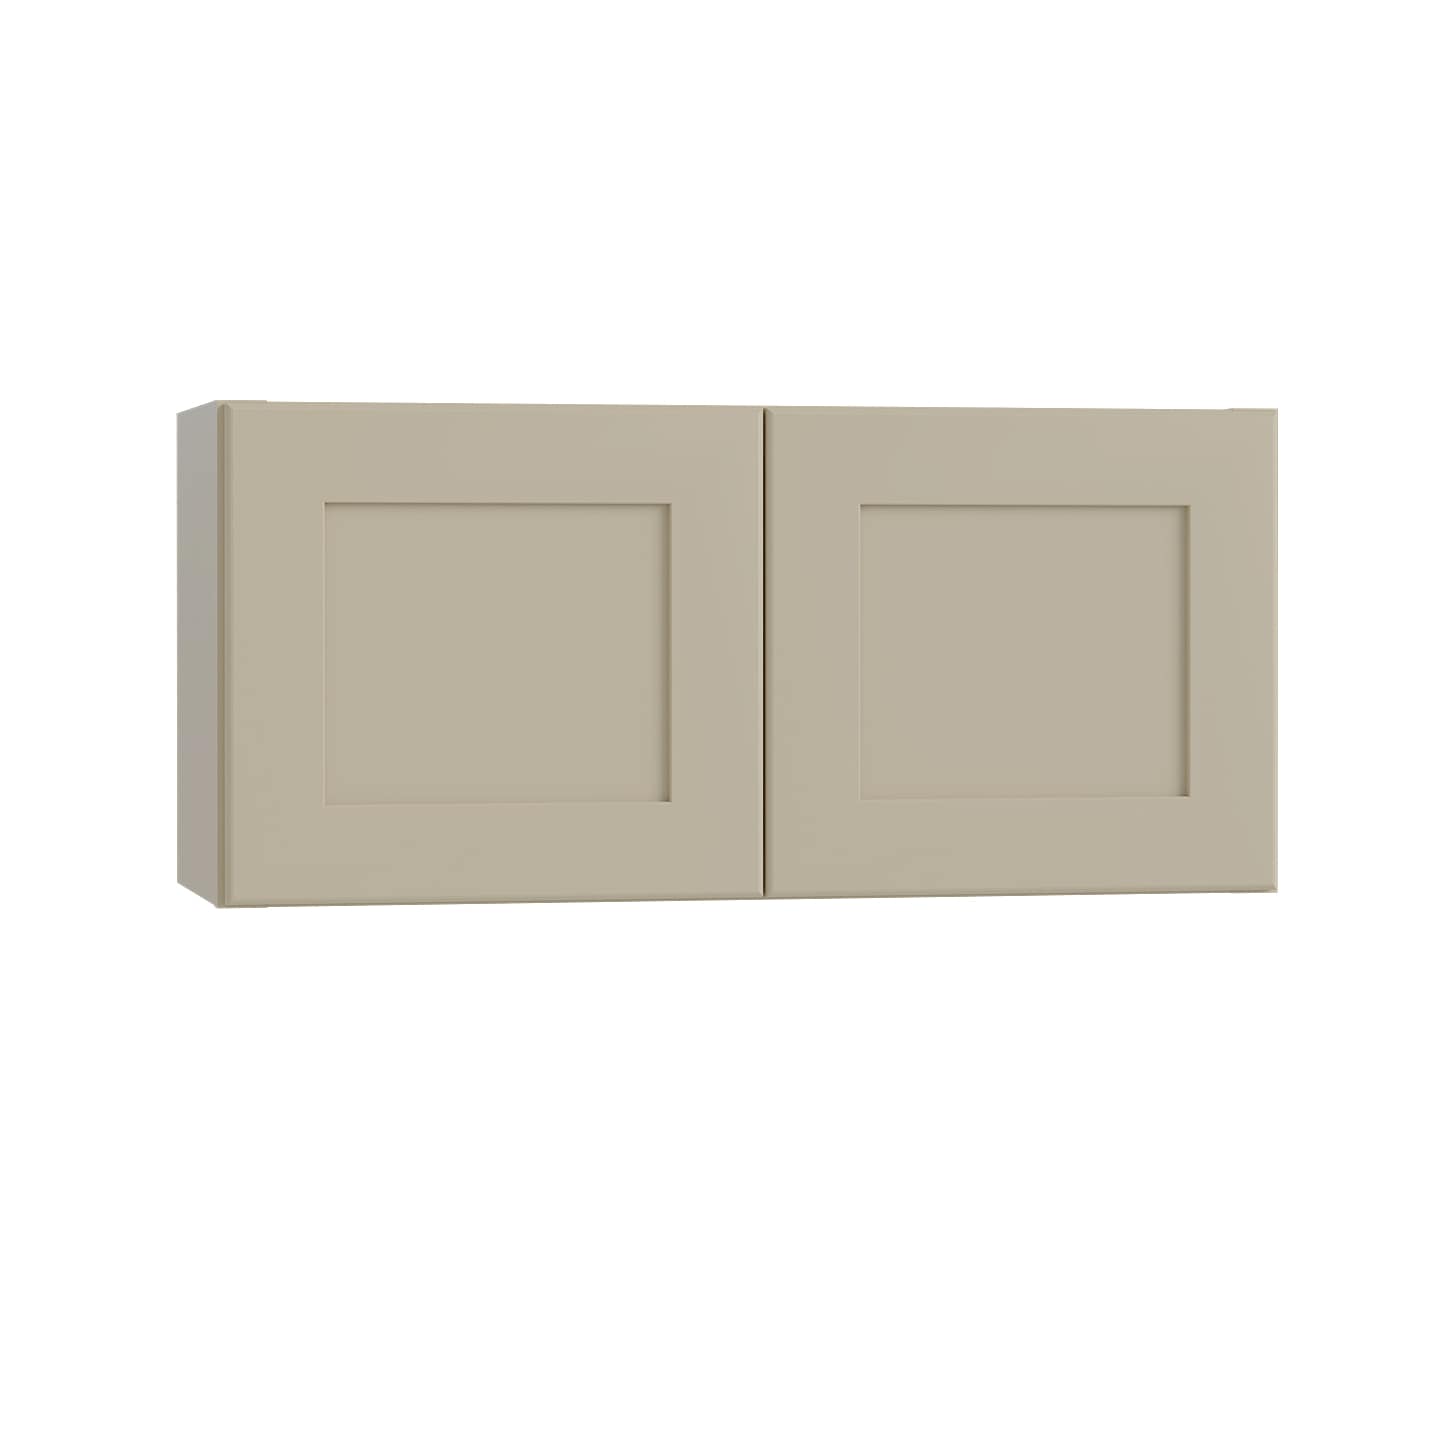 Luxxe Cabinetry 30-in W x 12-in H x 12-in D Norfolk Blended Cream Painted Door Wall Fully Assembled Semi-custom Cabinet in Off-White | W3012-NBC